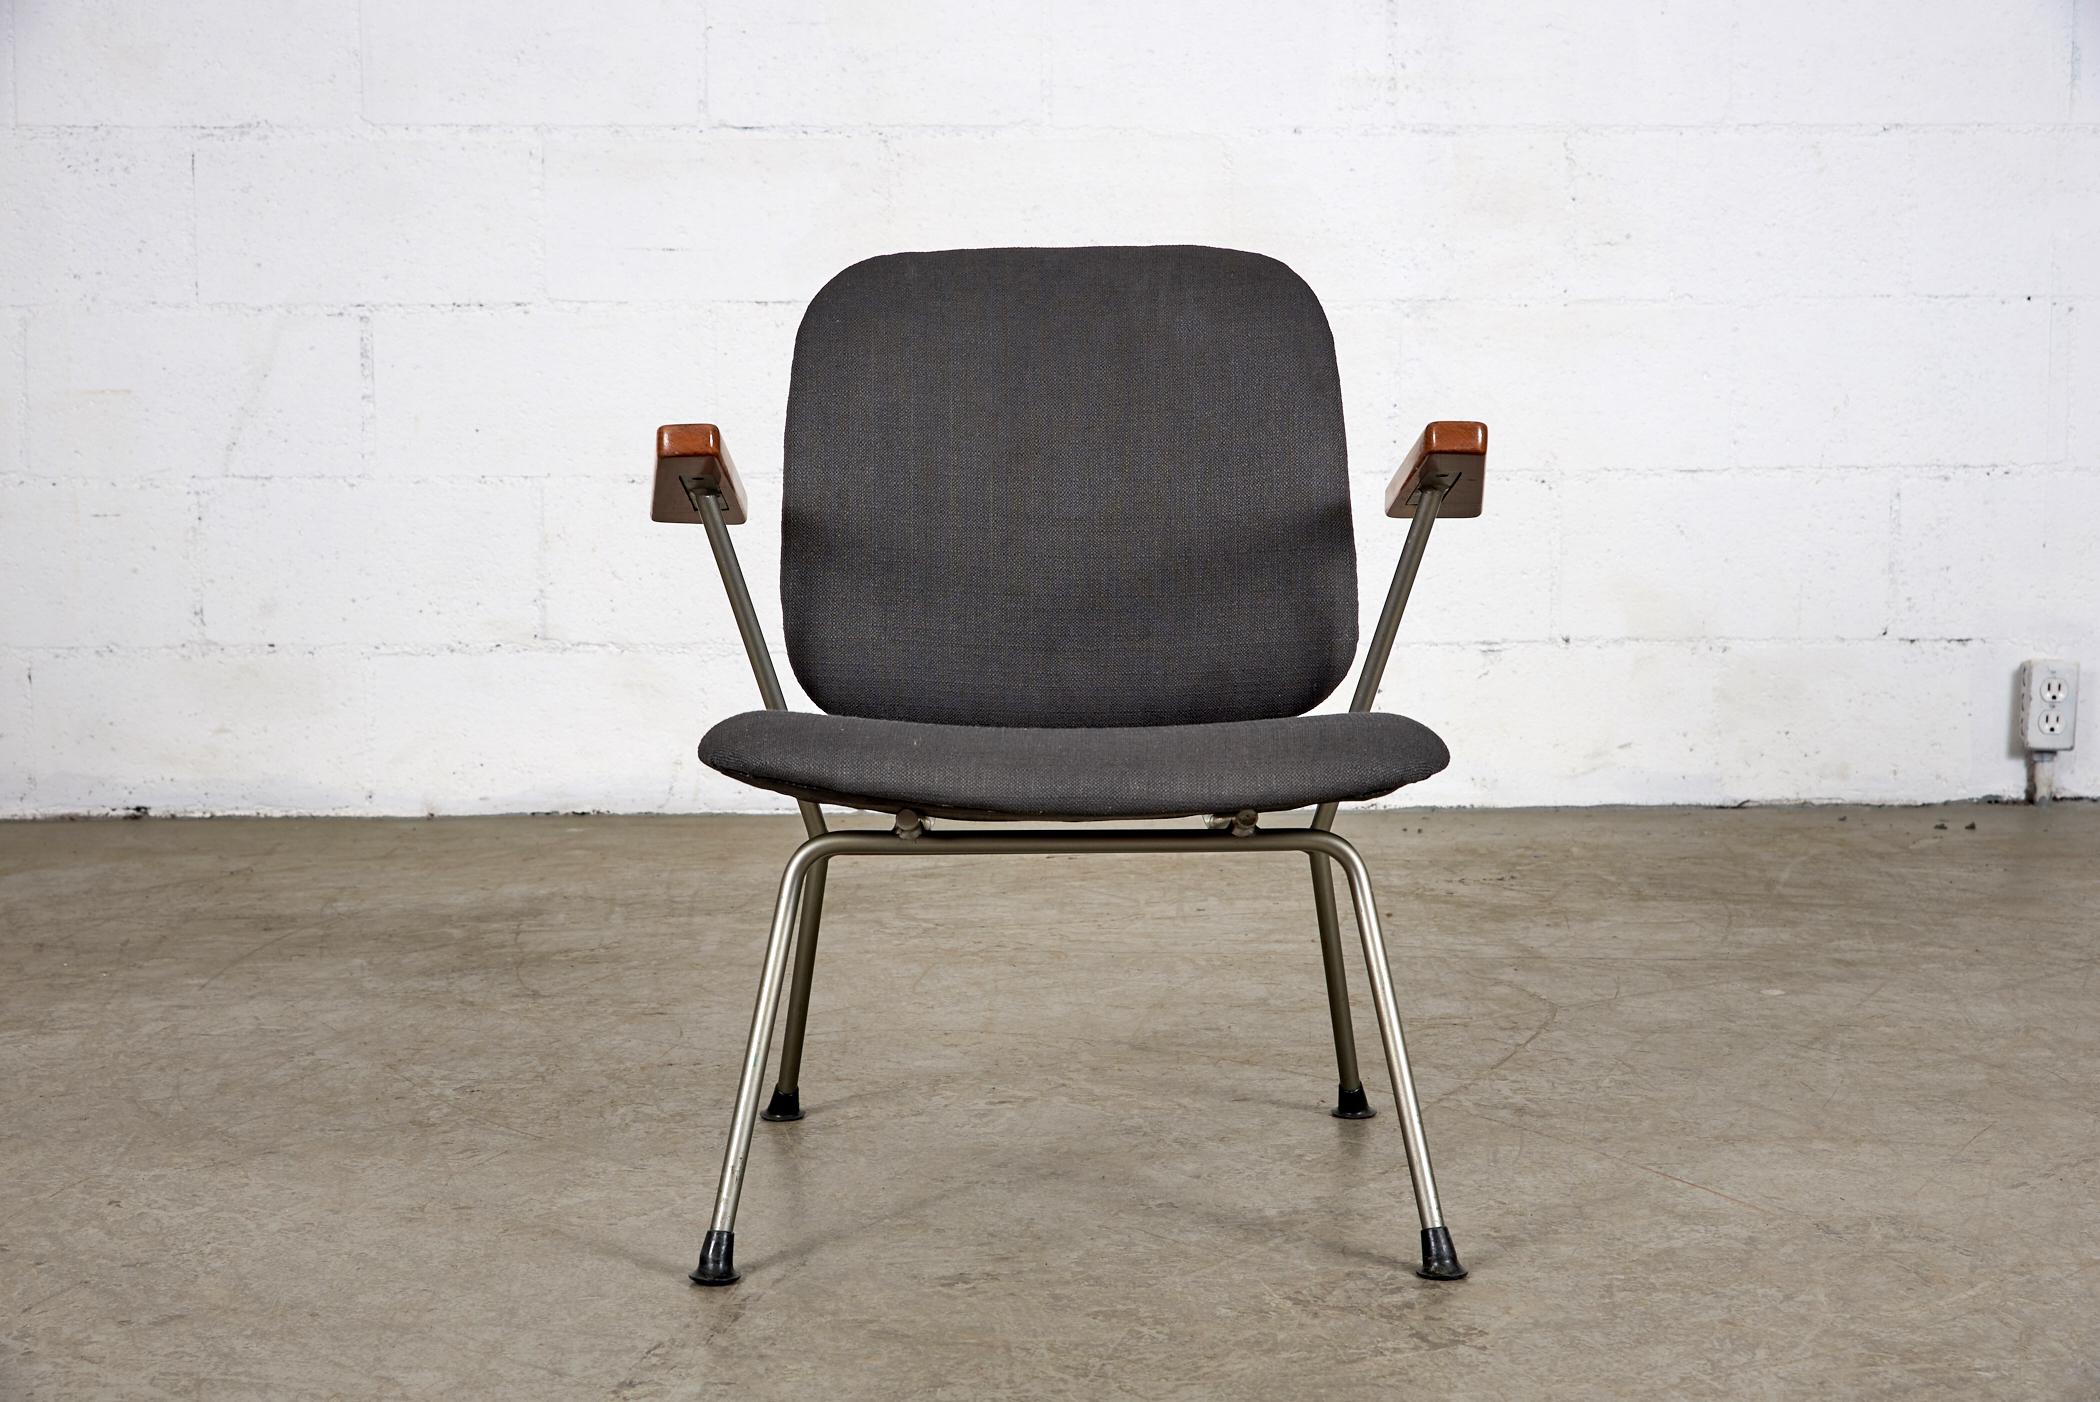 Kembo lounge chair newly upholstered in almost black fabric, with original steel grey frame, and lightly refinished teak arms. In original condition with some signs of wear consistent with its age and use.